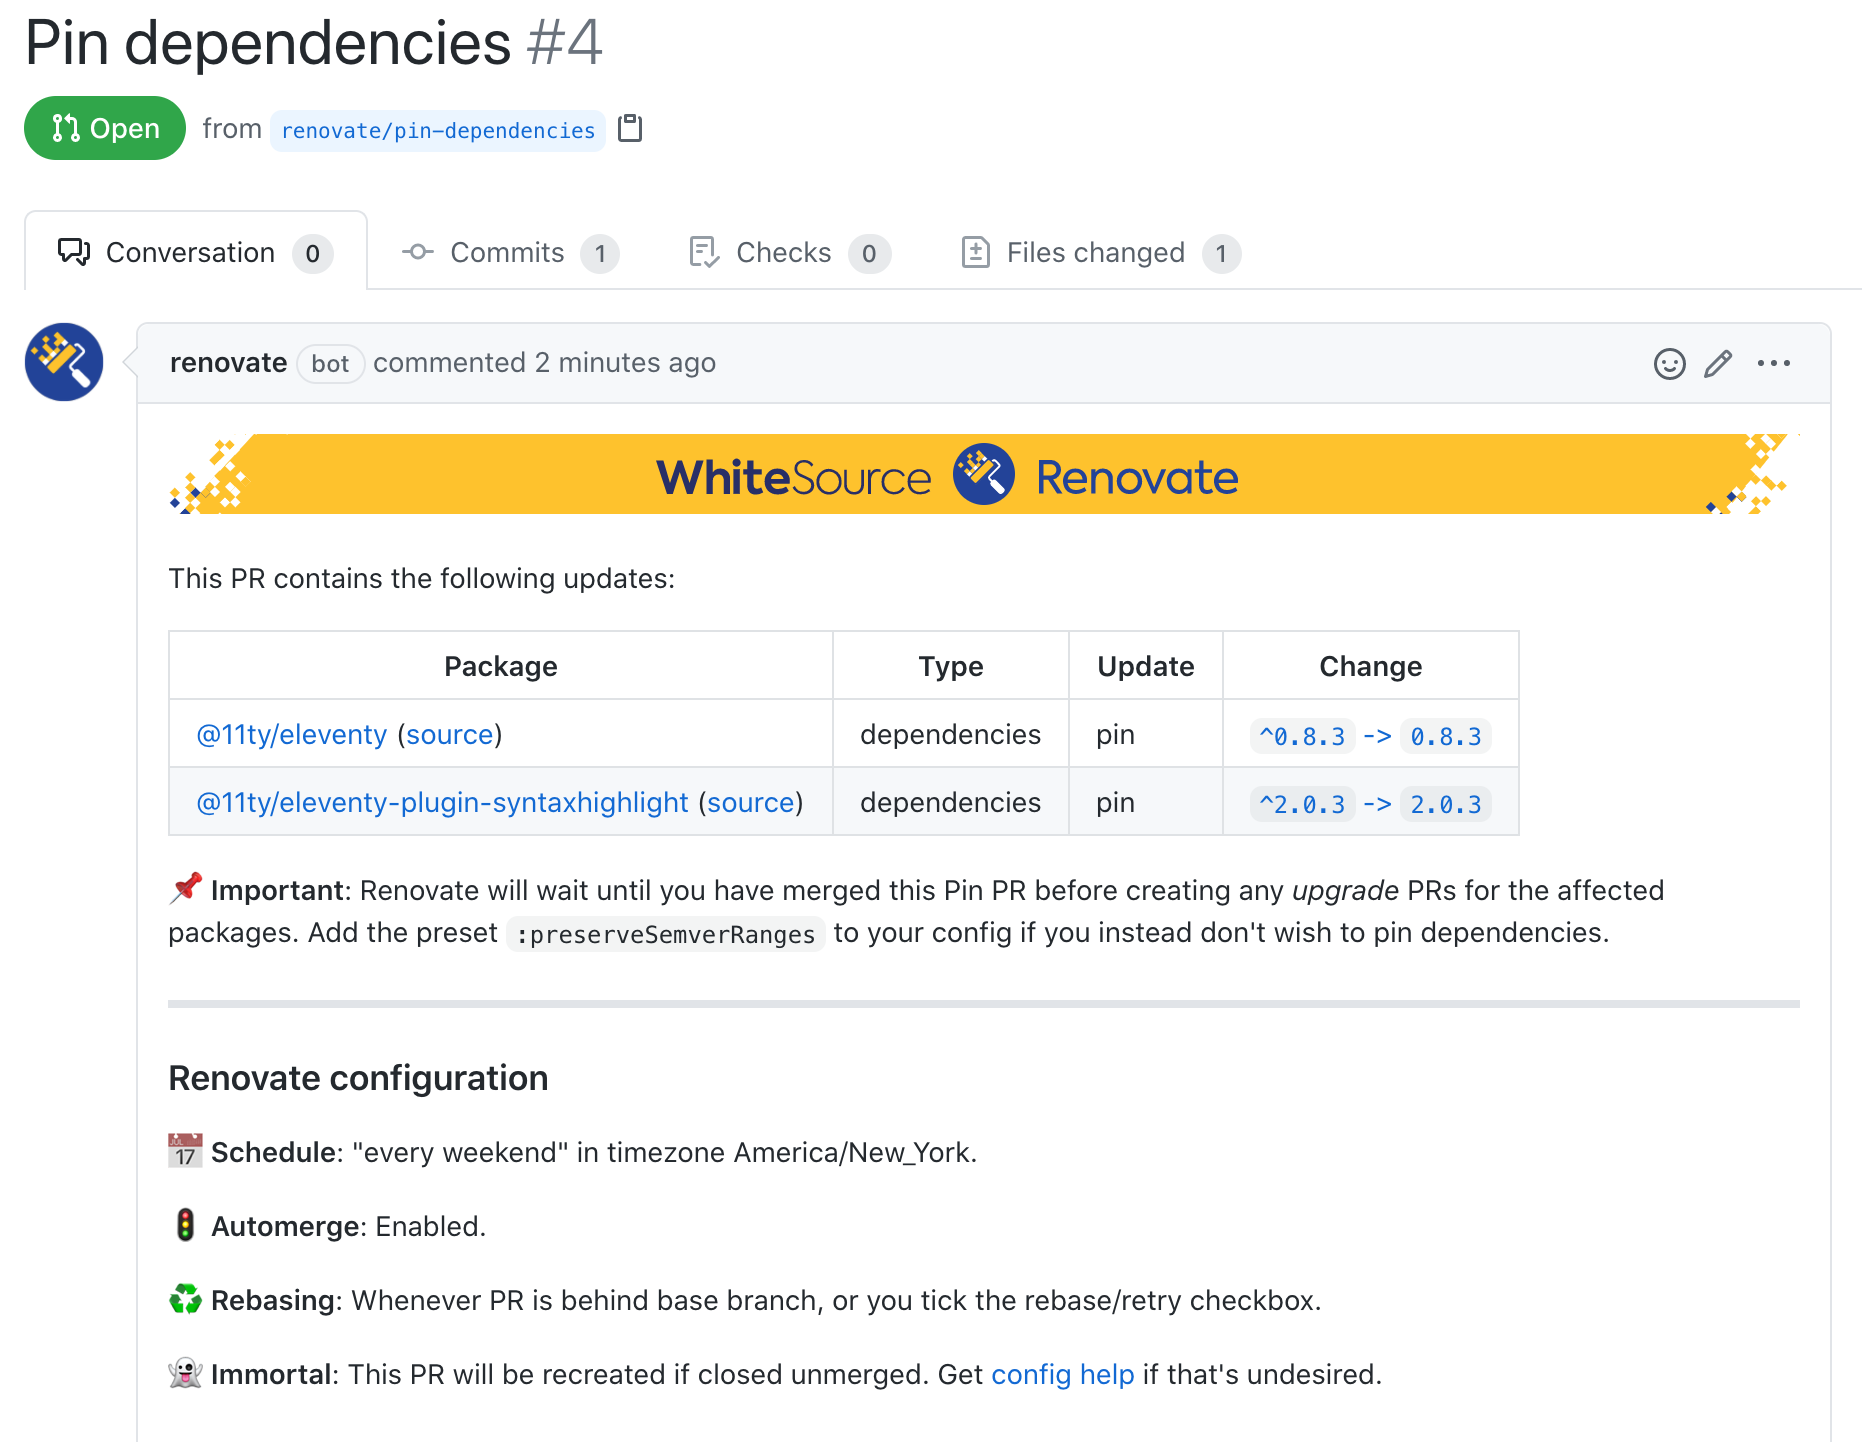 RenovateApp opens a pull request to pin dependencies